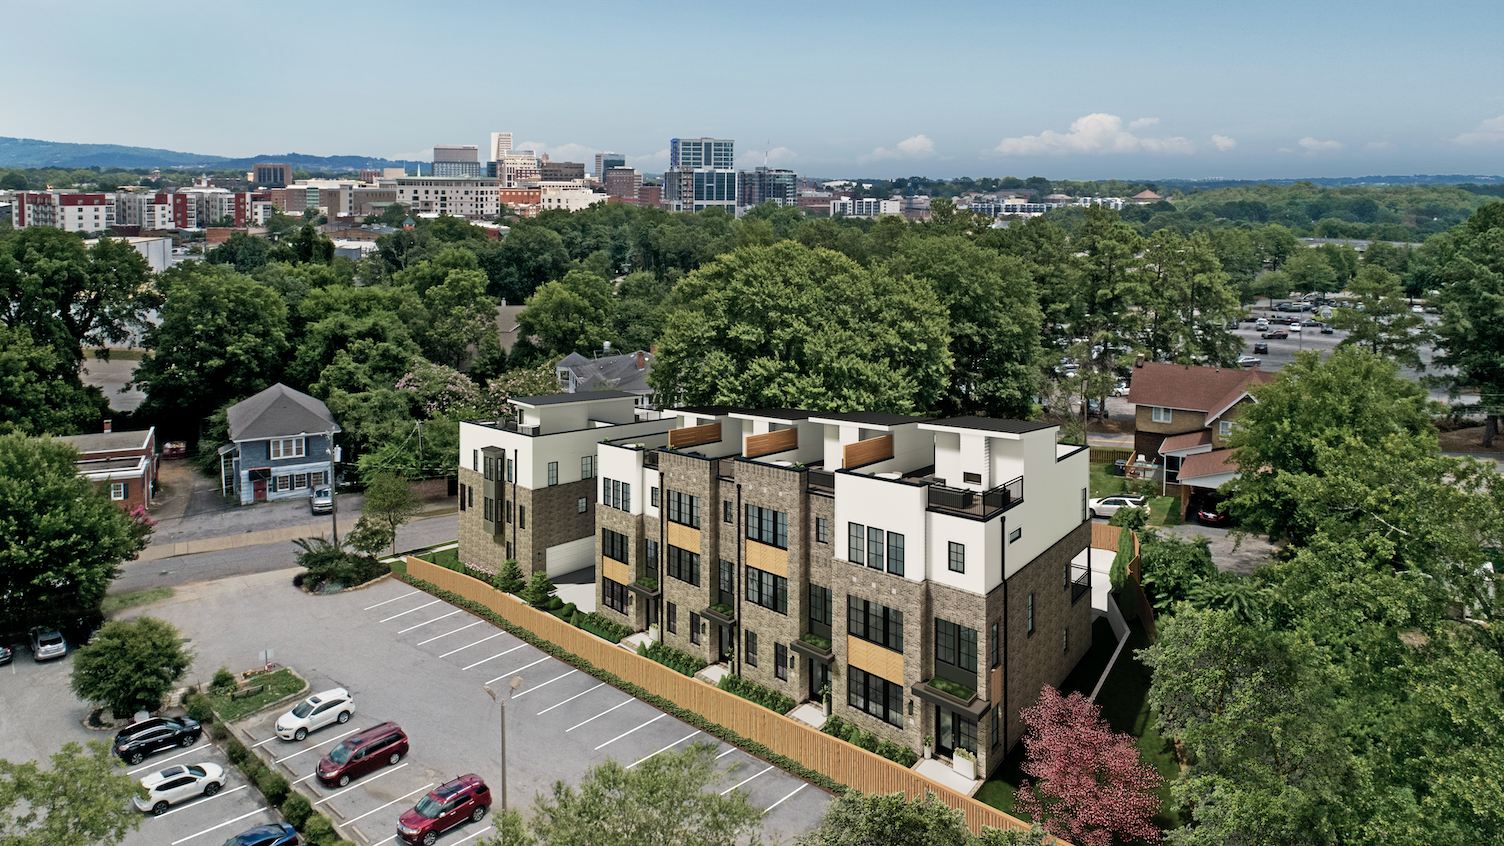 Coldwell Banker Caine, Creative Founder, and Blue Wall Real Estate Announce Bradshaw Commons